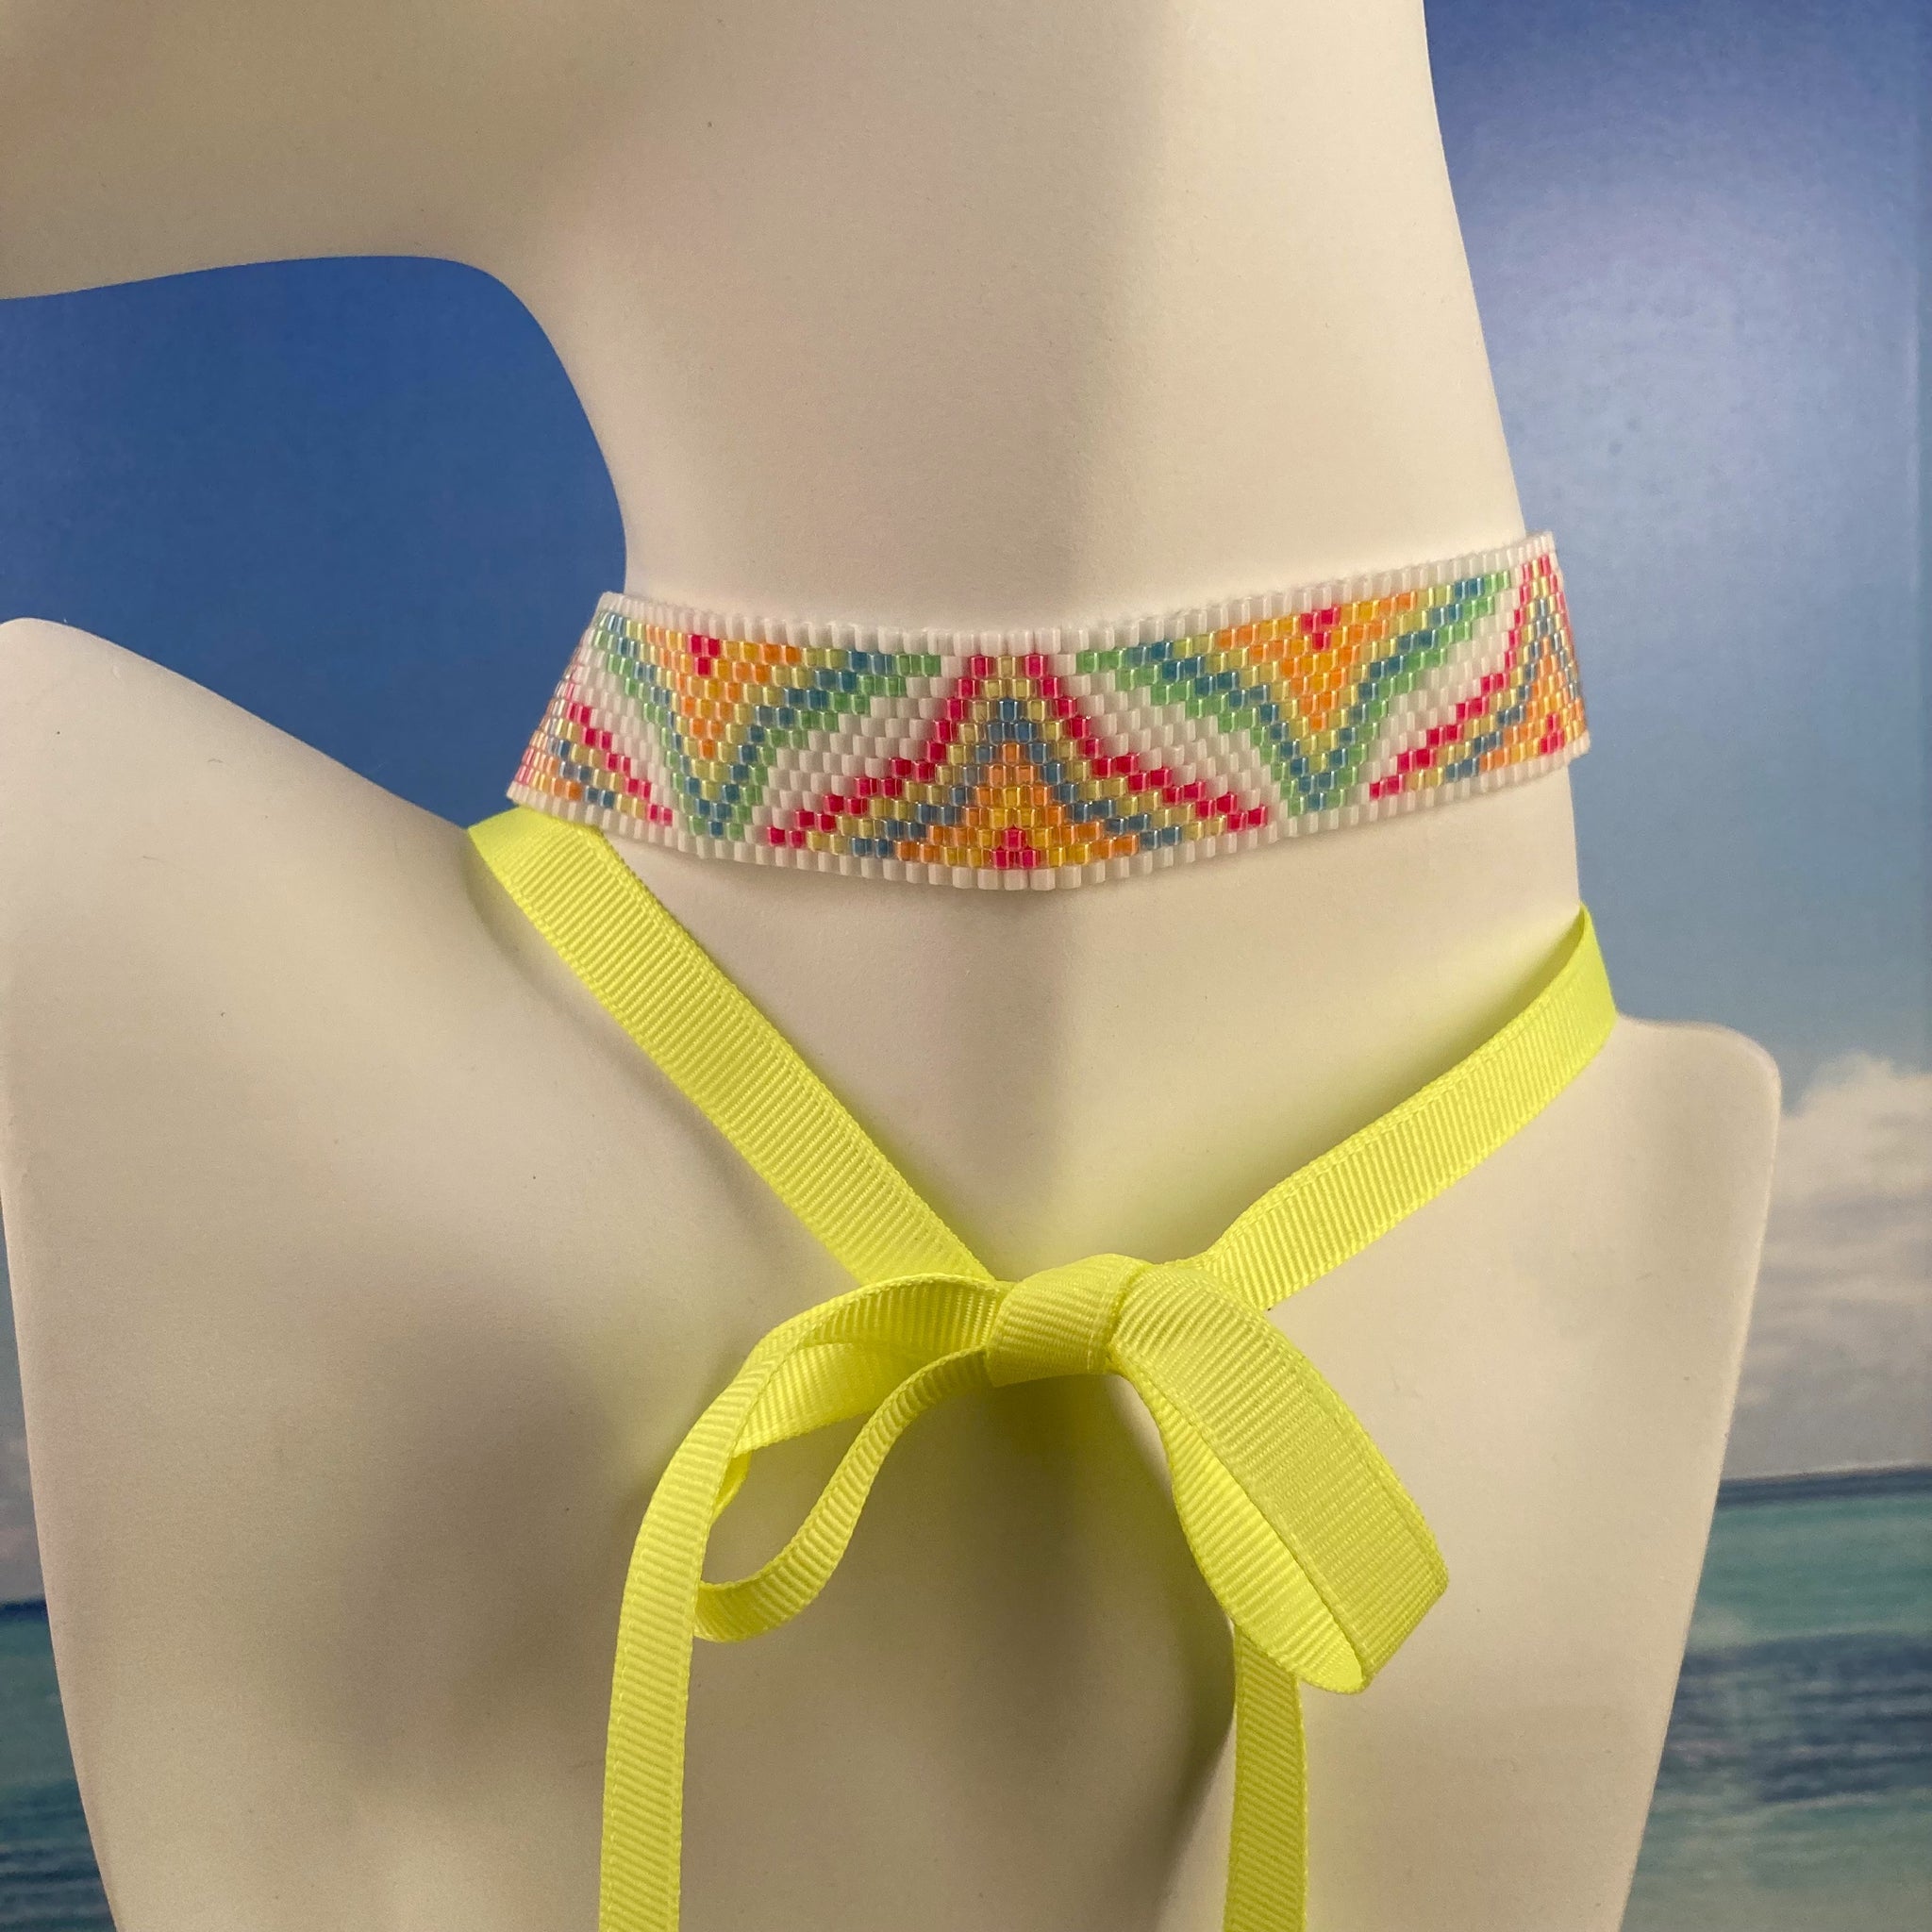 Beaded Neon Choker Neon Yellow Ribbon Vogue Couture UV light glow Night club Dance floor Wedding party edgy sexy handmade lariat tied dressy date night statement necklace one of a kind  Beaded By The Beach made in America USA 